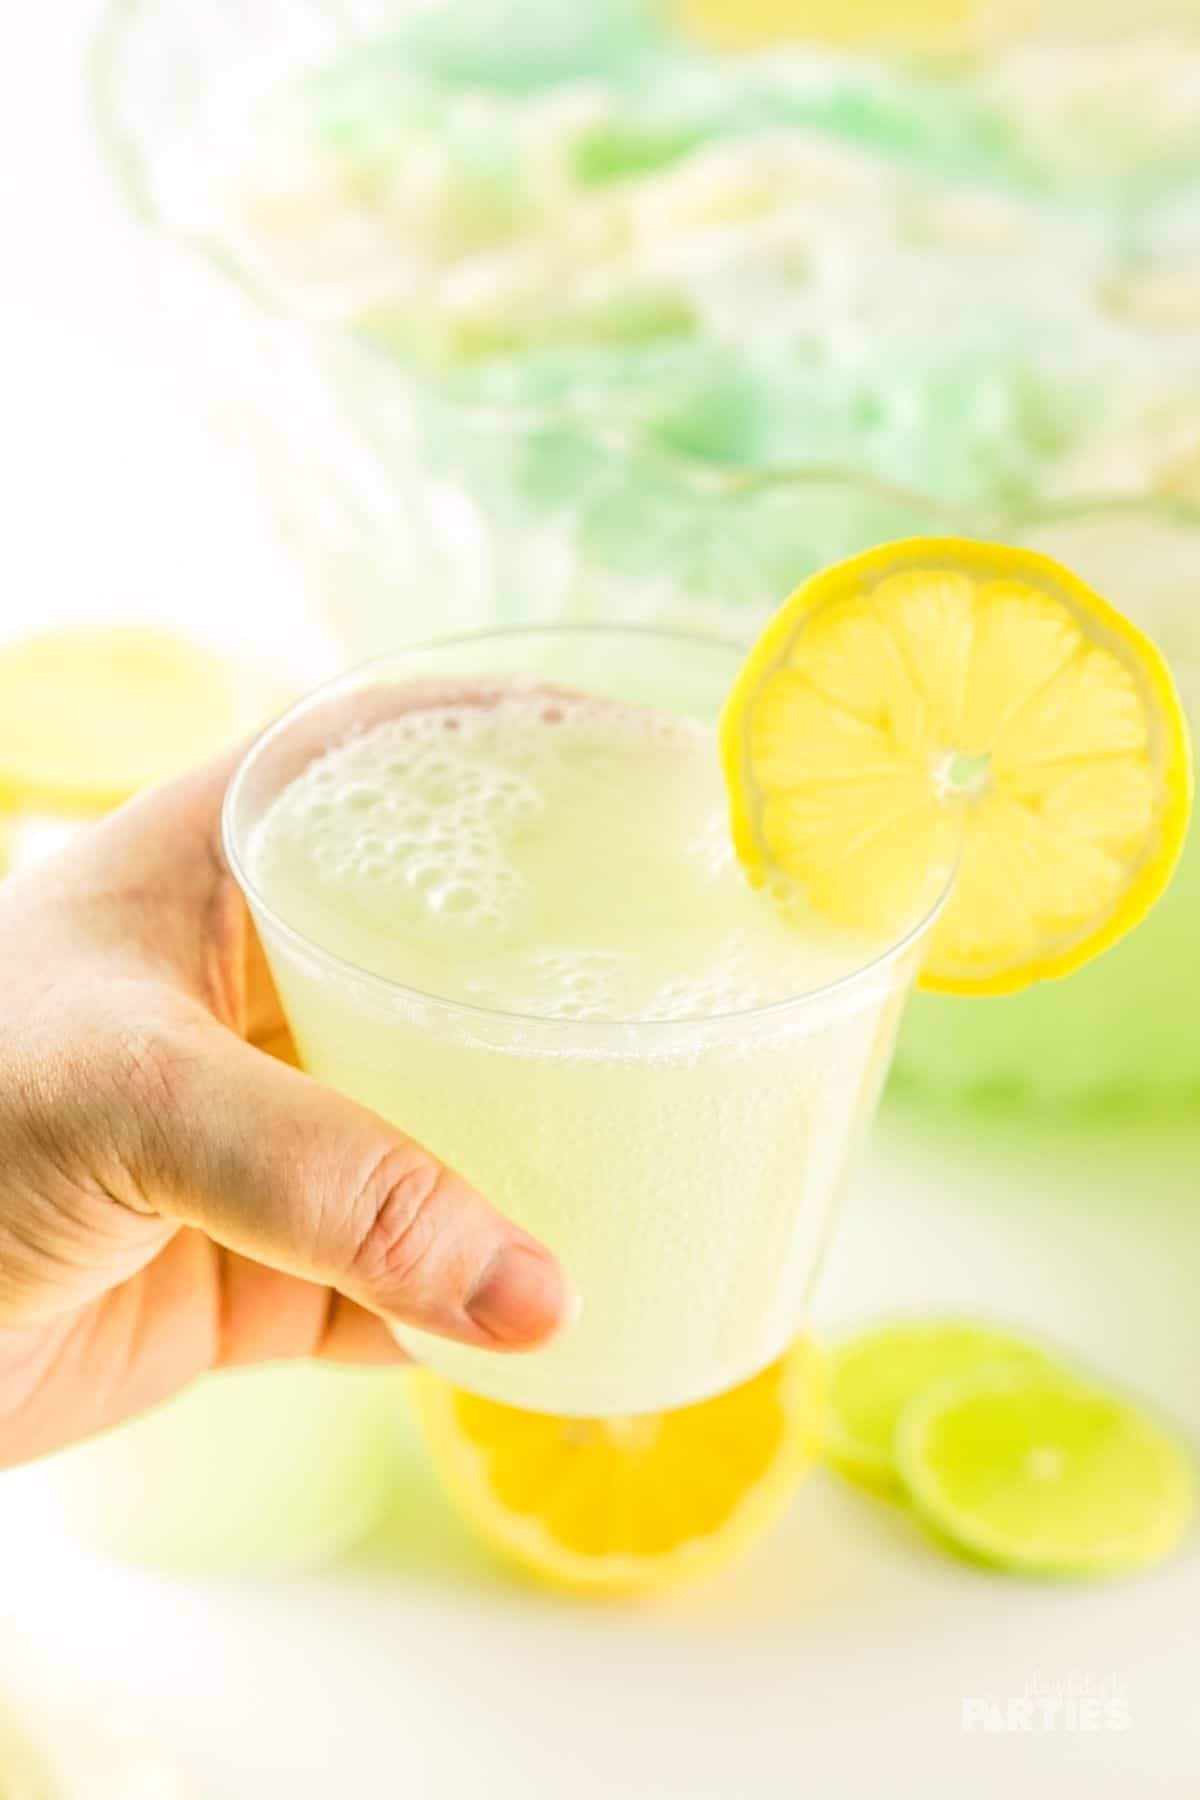 A woman's hand holding a cup of lemon lime party punch.